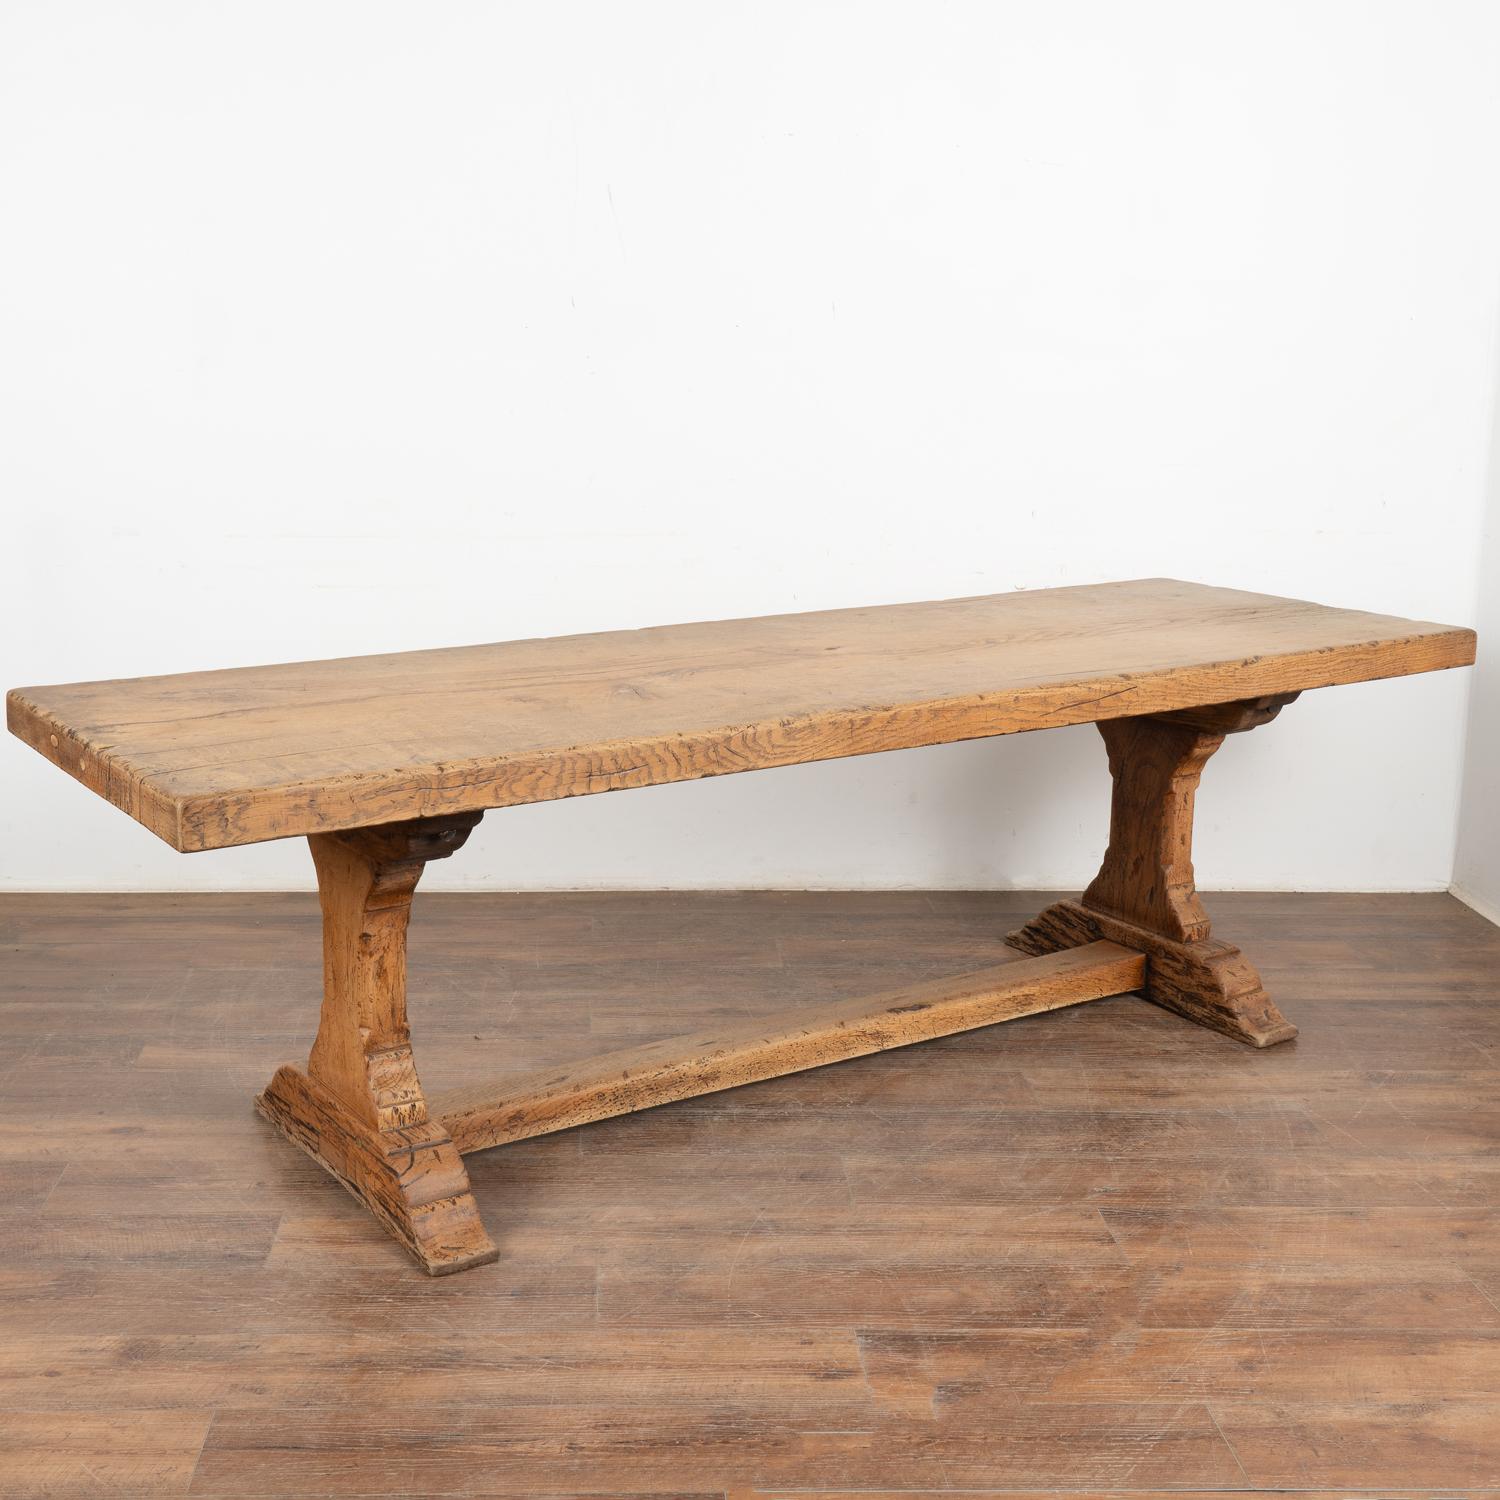 Impressive at just over 8' long with one solid plank top, this dramatic dining table will make a grand gathering place in today's modern home.
The heavy oak top is impressive; rich character is revealed in the scratches, nicks, knots, and distress